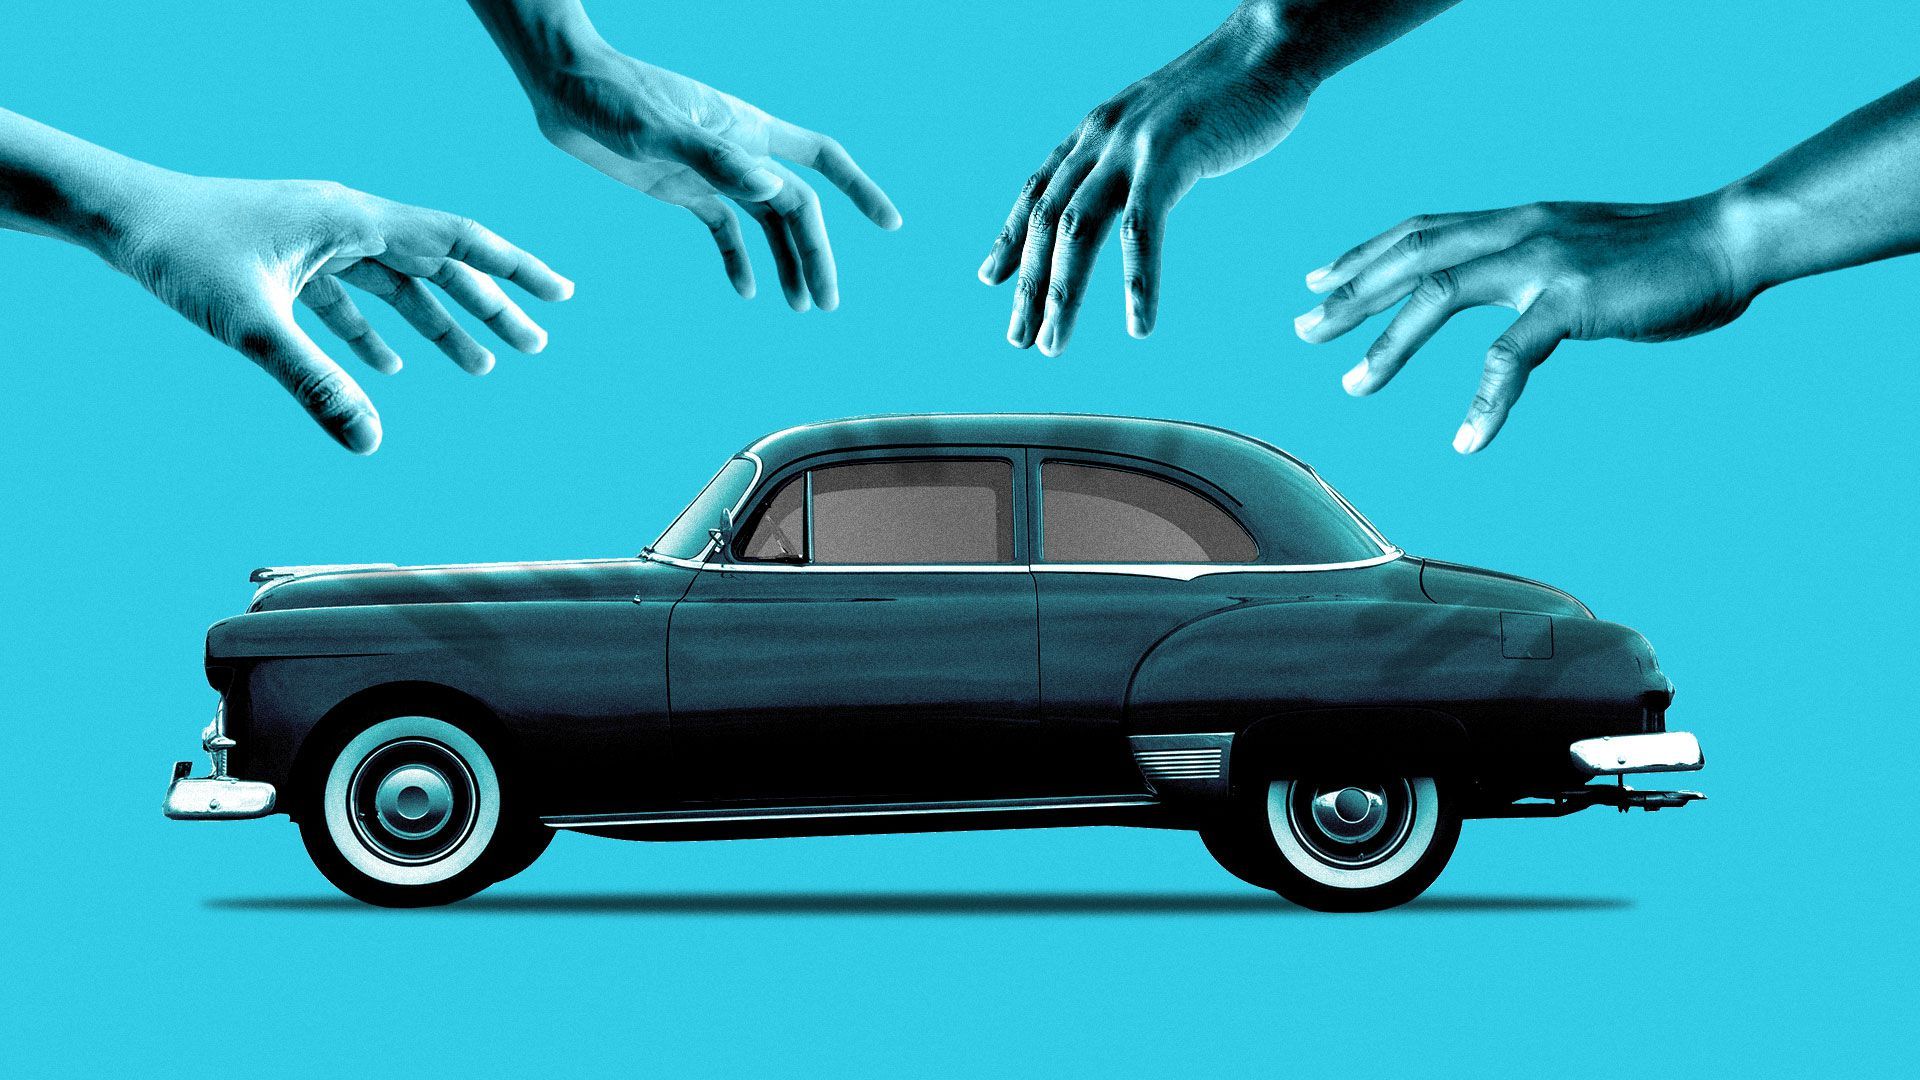 Illustration of hands reaching for one car